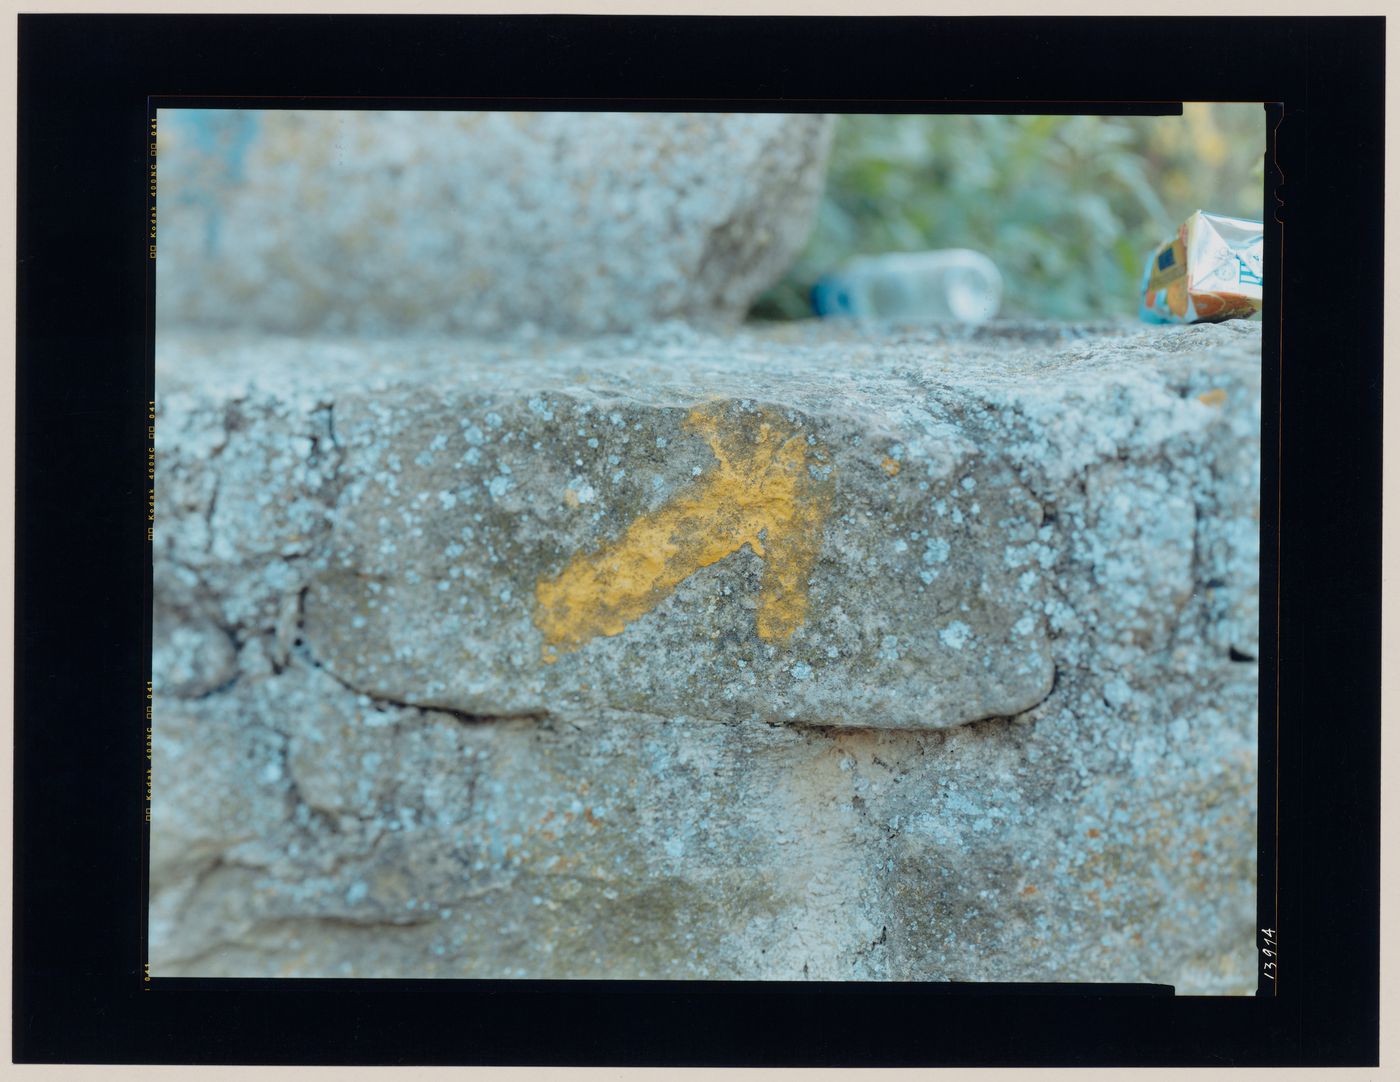 Close-up view of a stone wall bearing a painted arrow showing rubbish, Puente la Reina, Spain (from the series "In between cities")